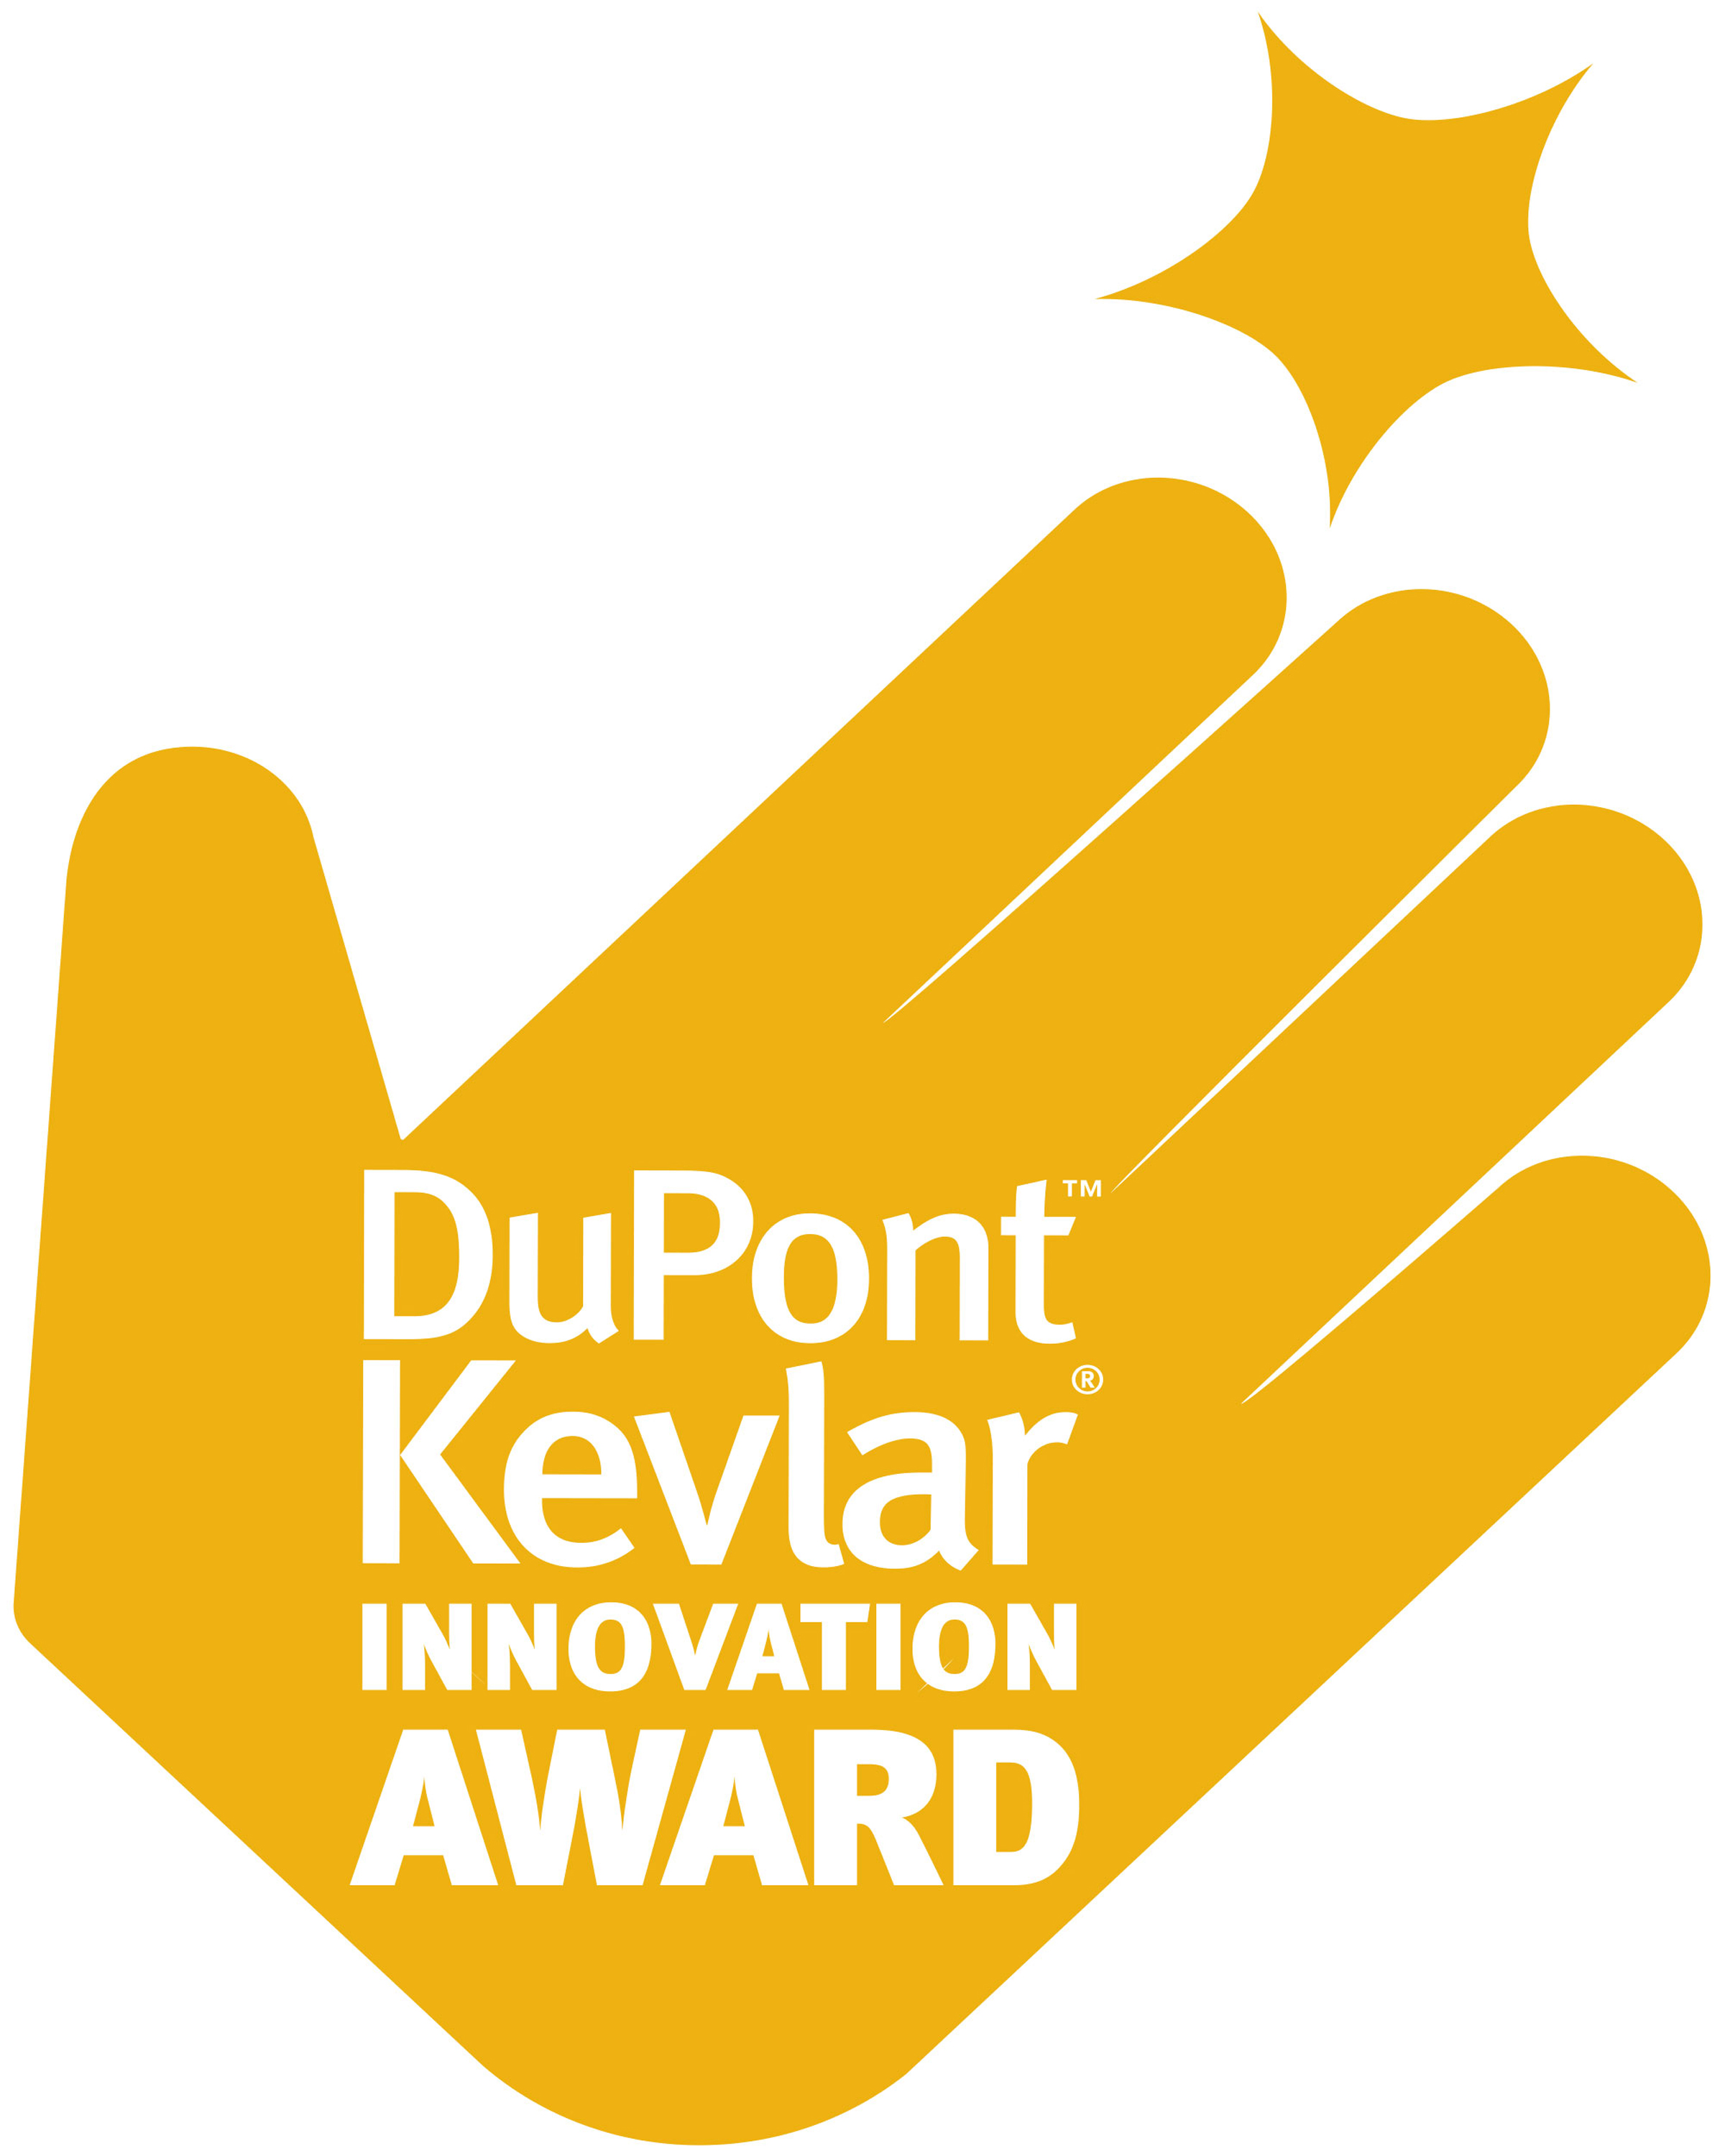 DuPont Announces Winners of the 2018 DuPont Kevlar Glove Innovation Awards, 2018-11-09